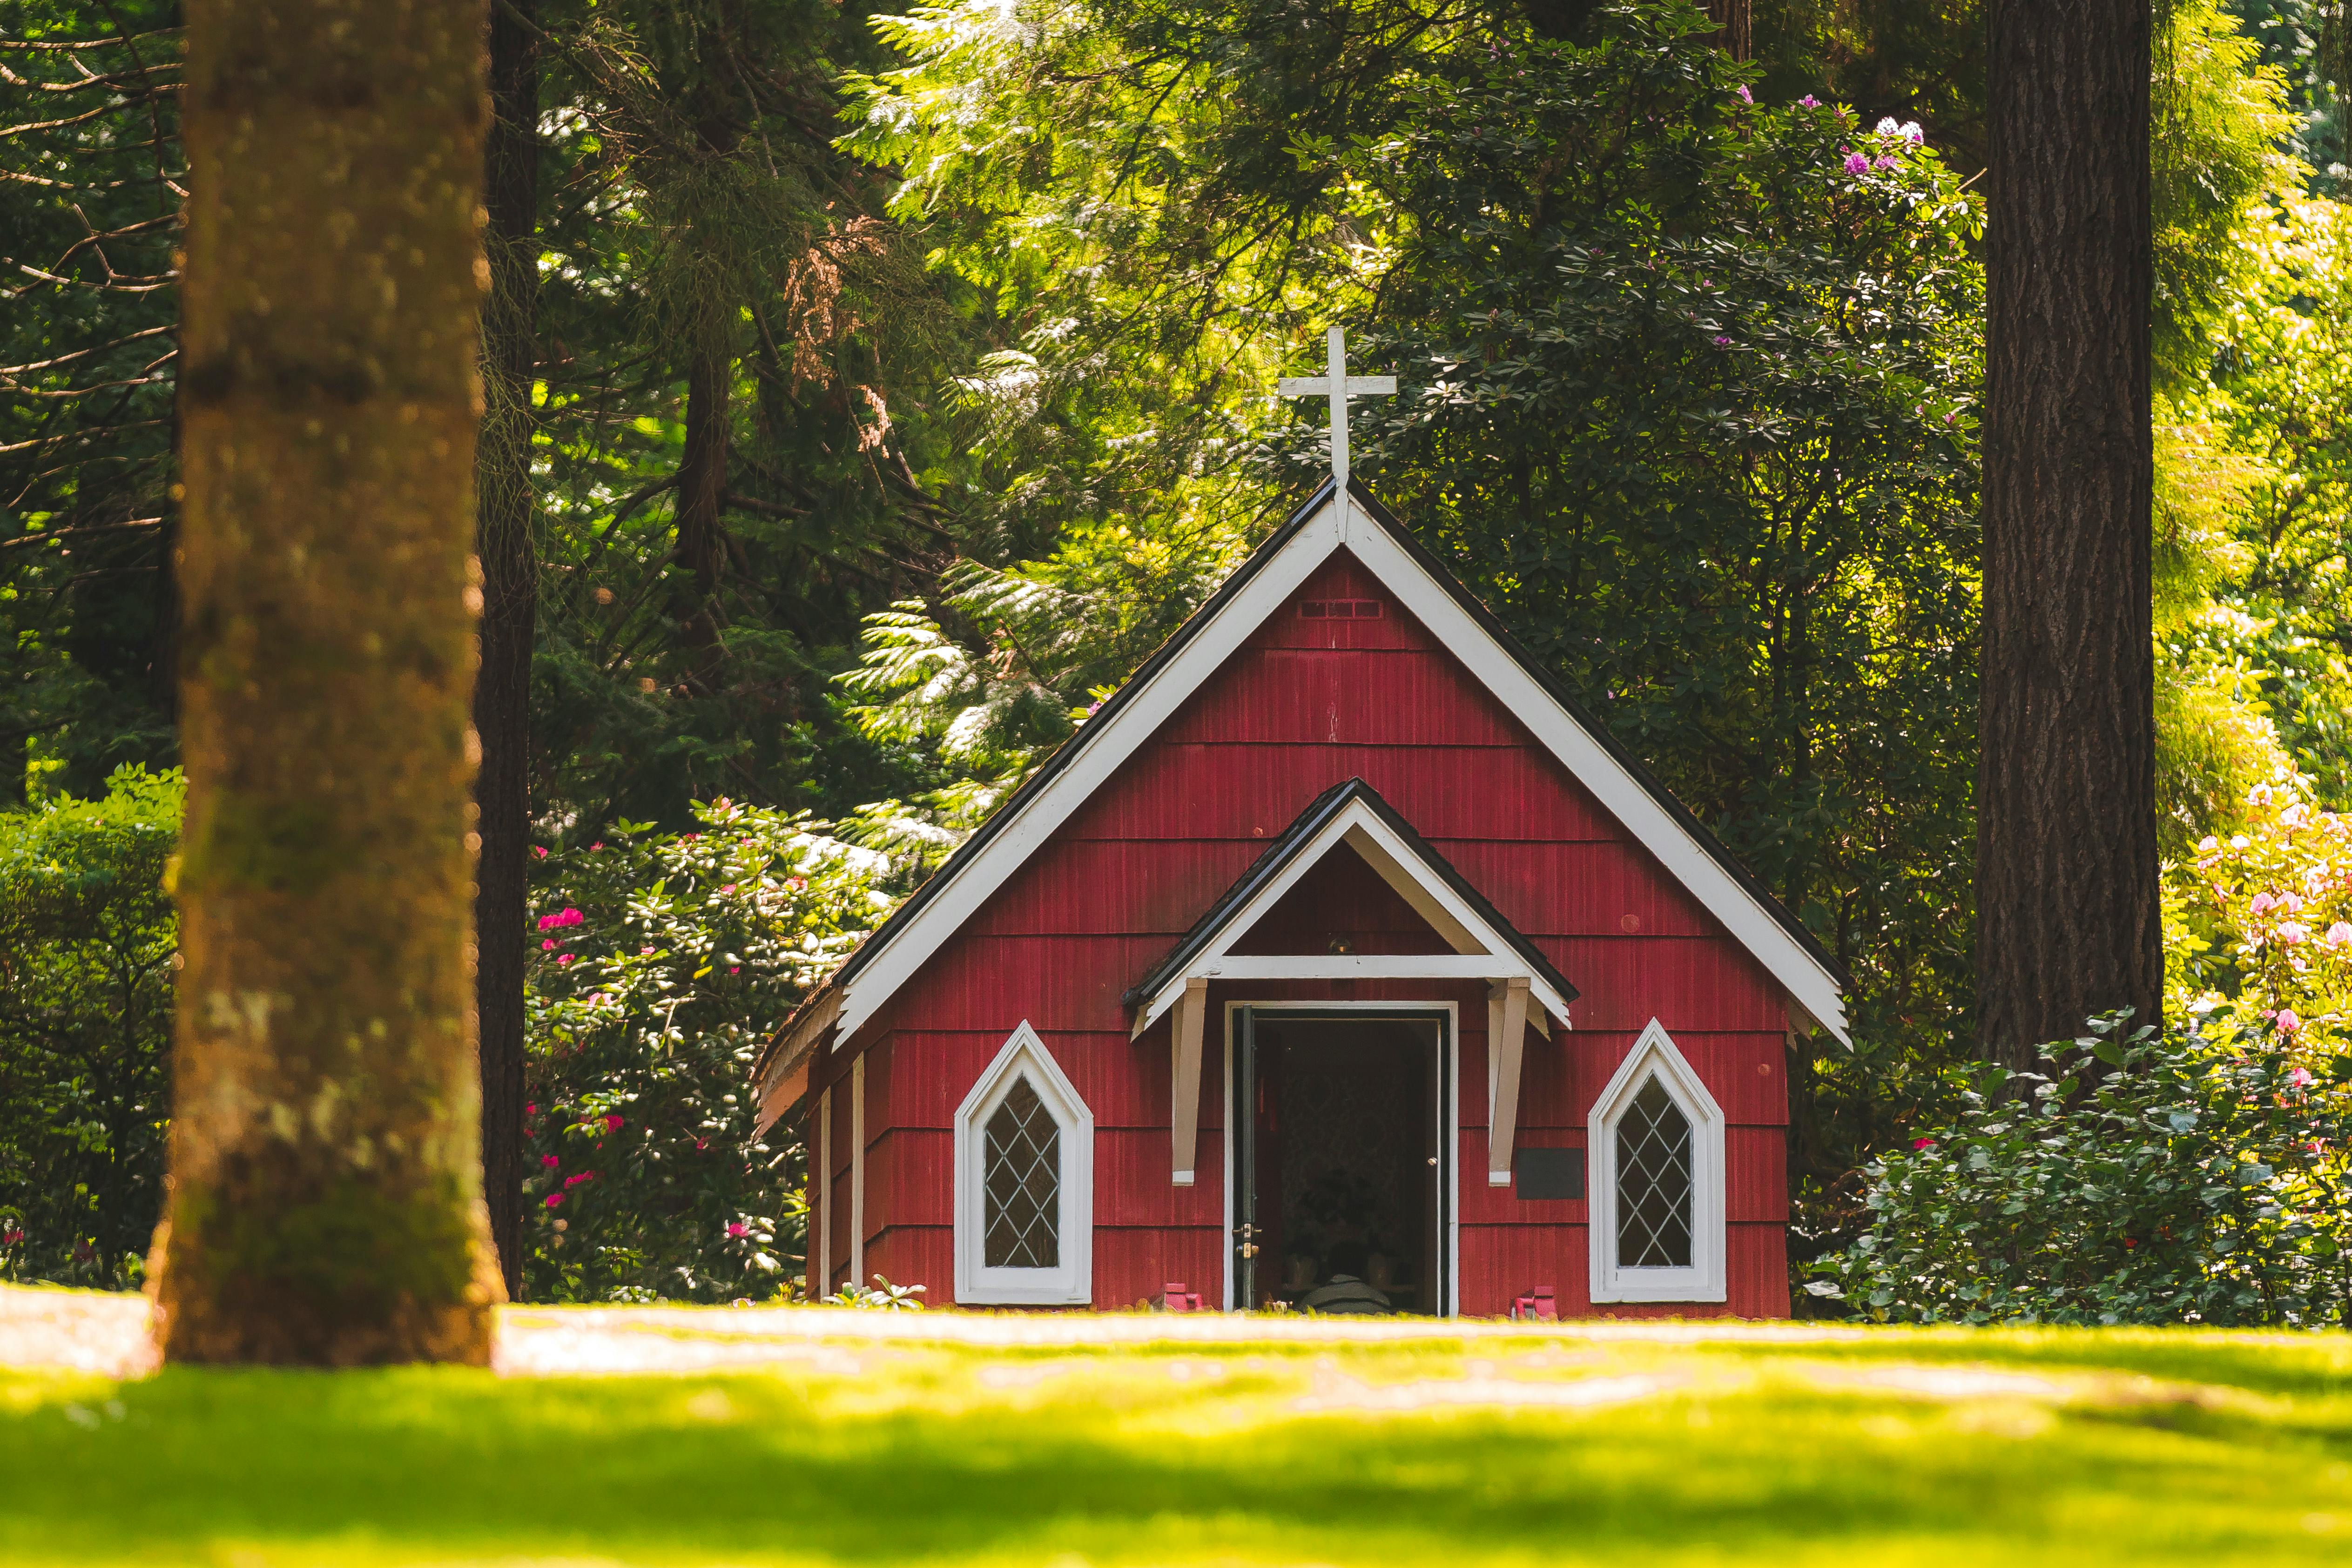 Red chapel on a grassy field with trees. | Photo: Pexels